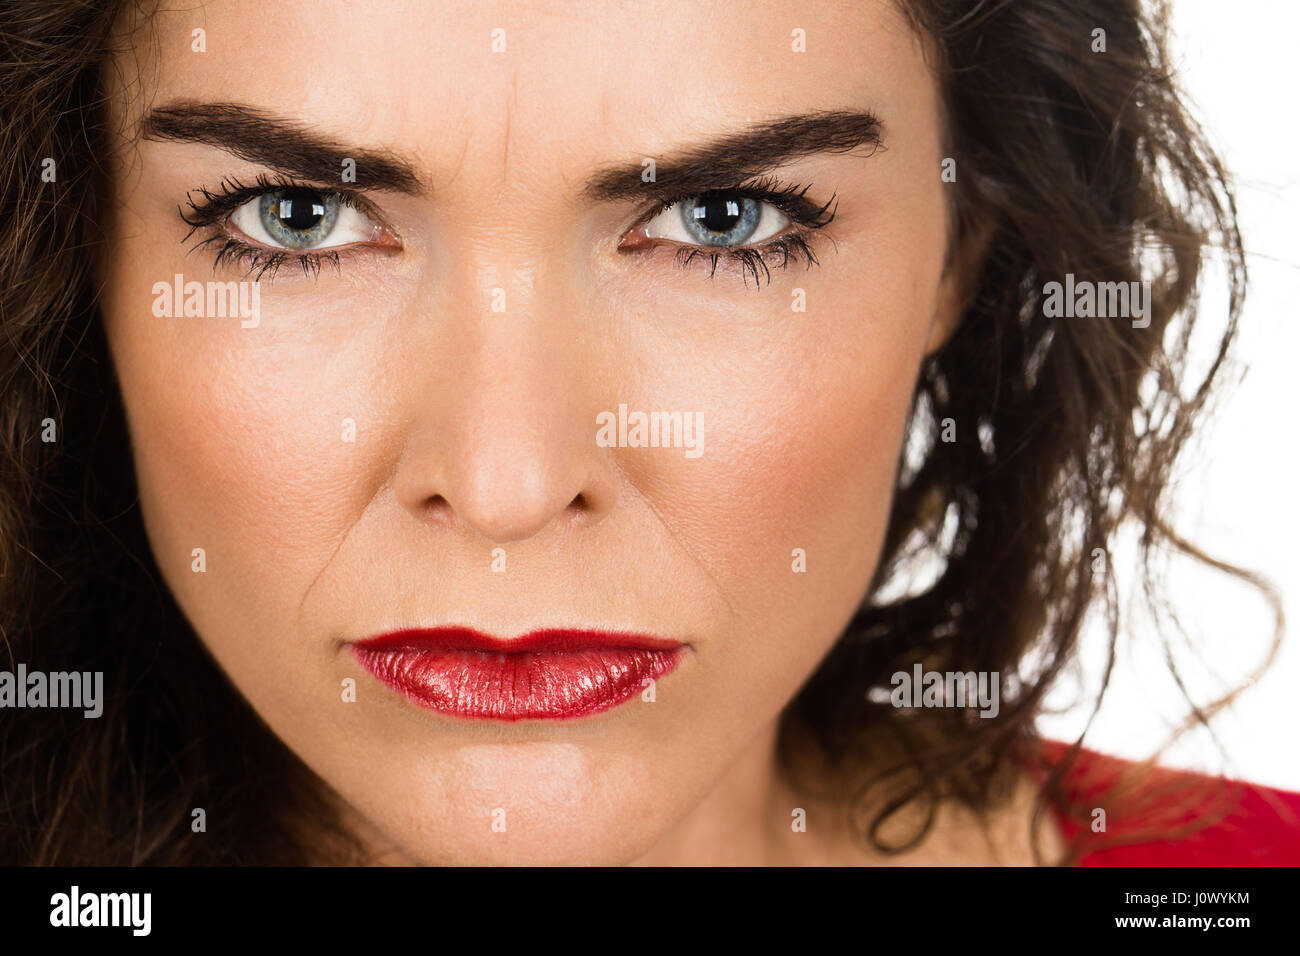 A very annoyed angry and woman. Isolated on white. Stock Photo